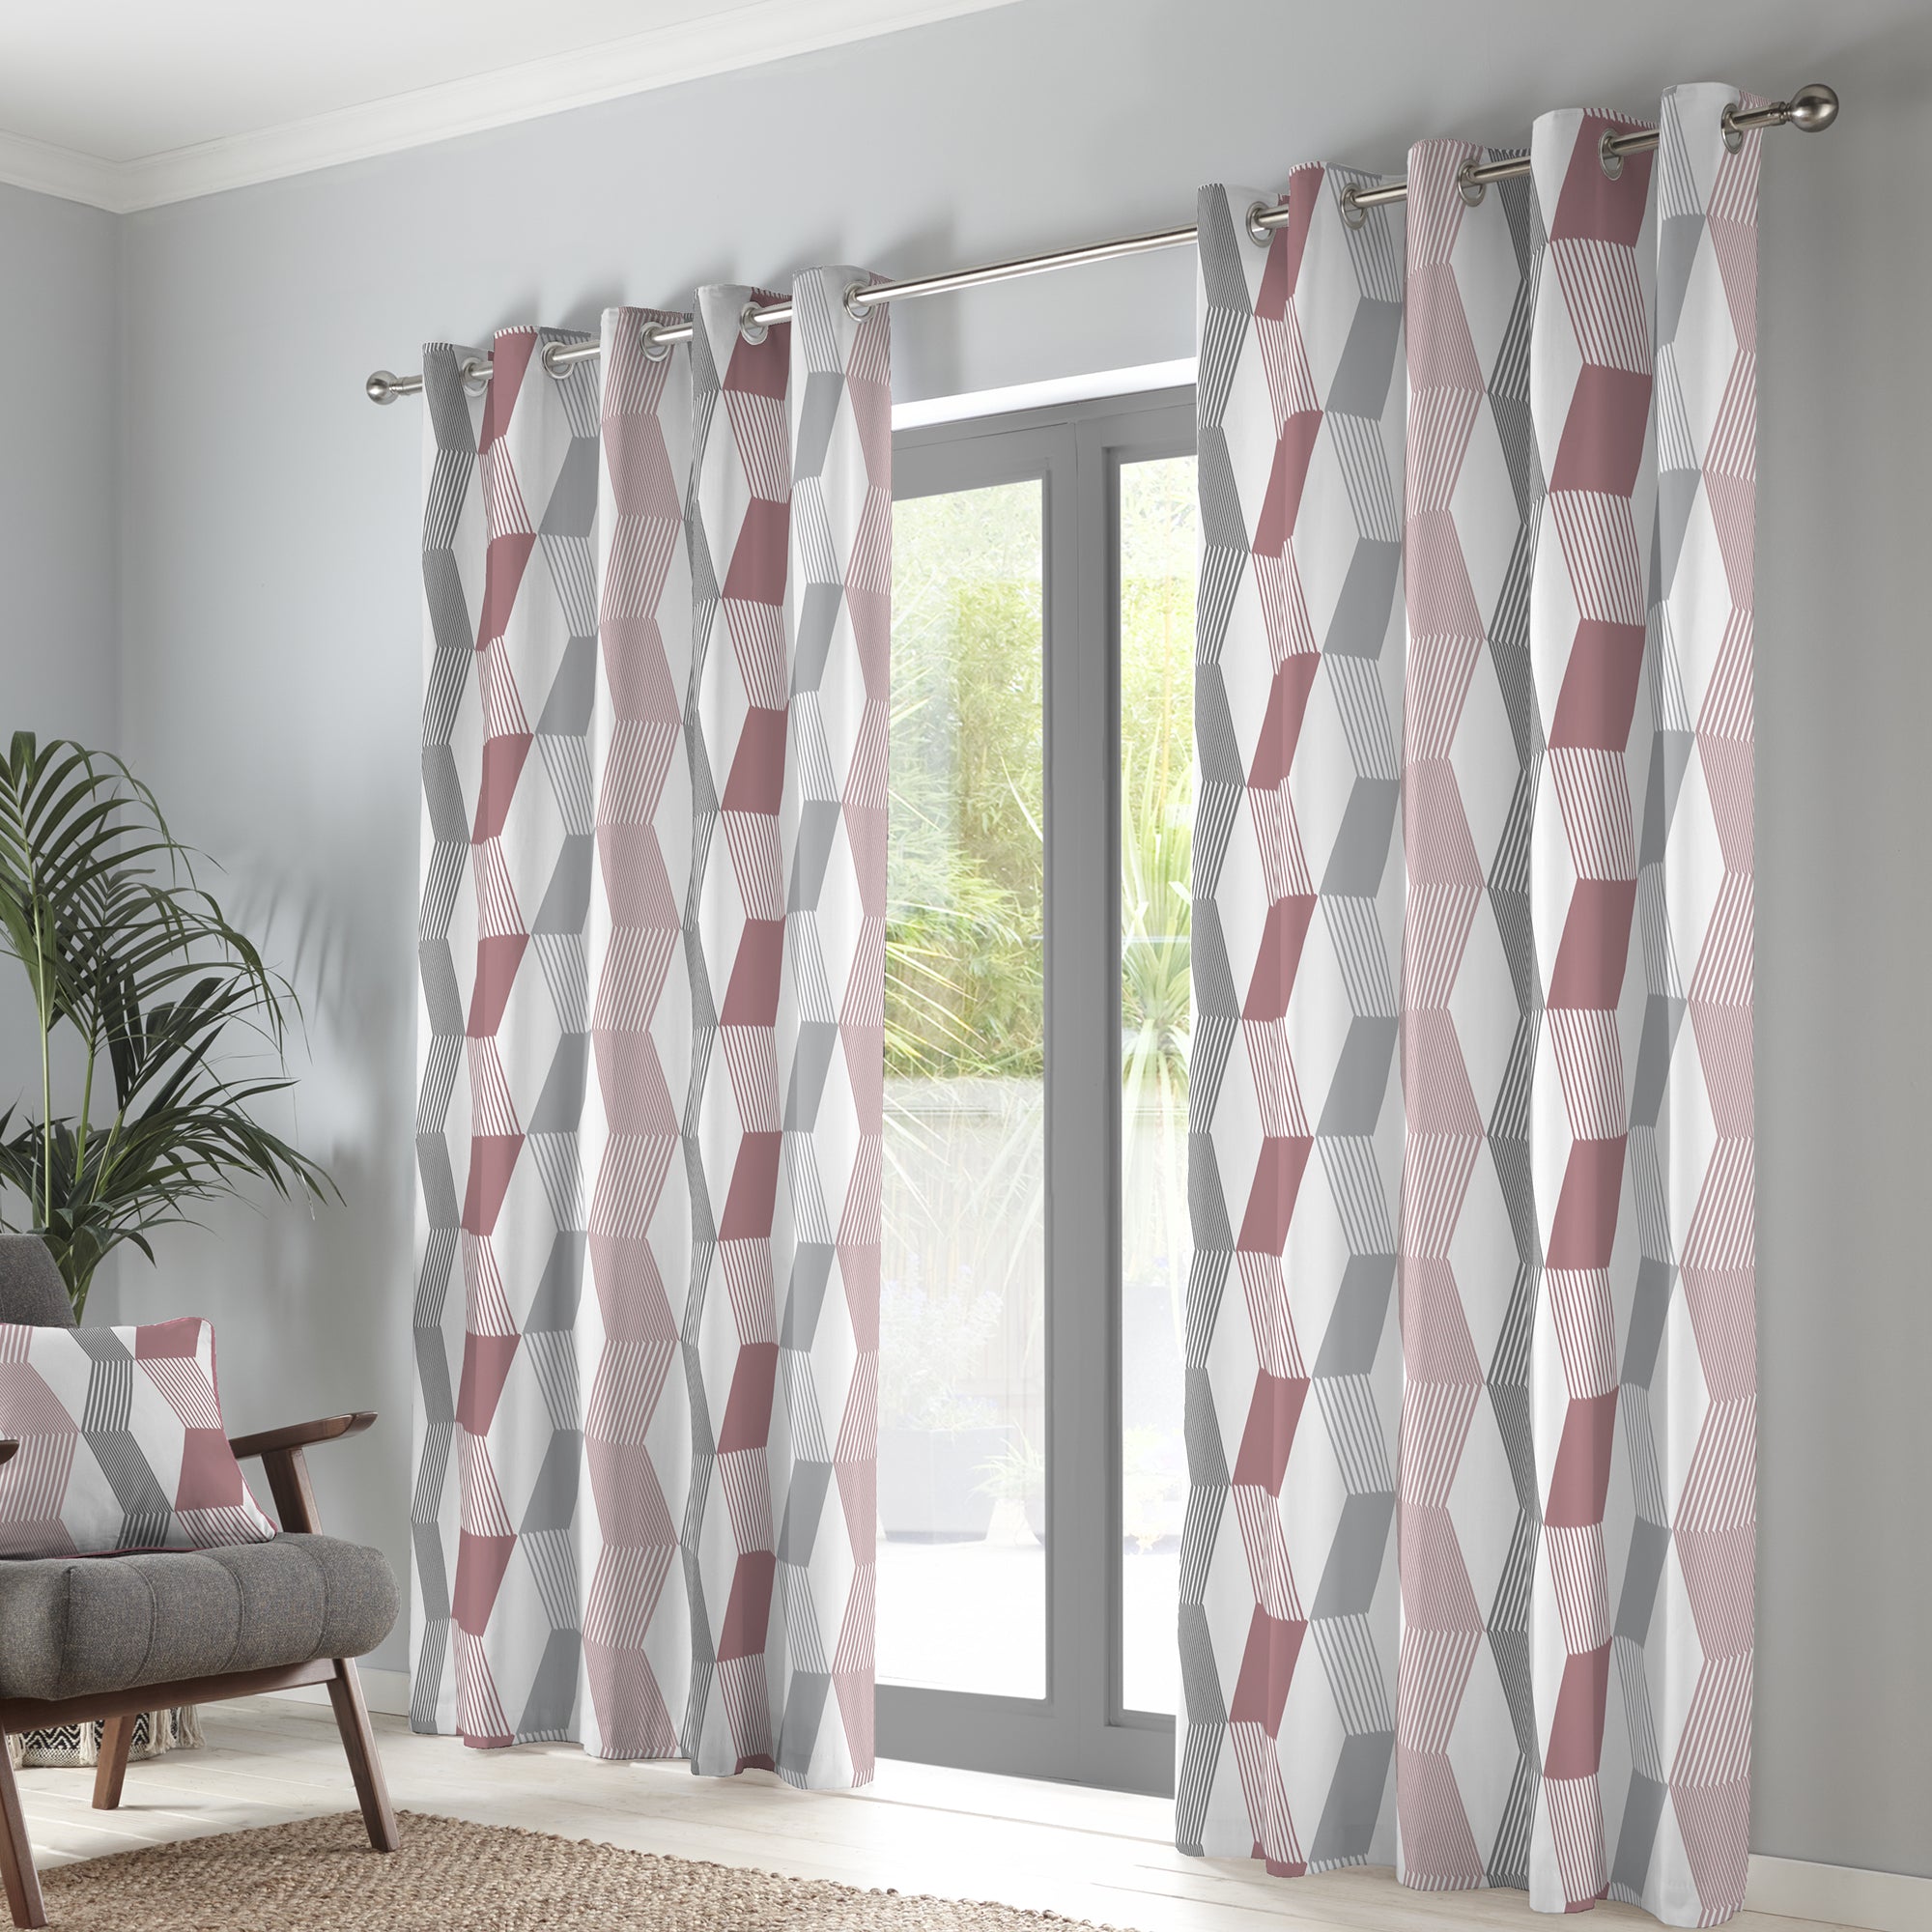 Magna - 100% Cotton Pair of Eyelet Curtains in Blush - by Fusion